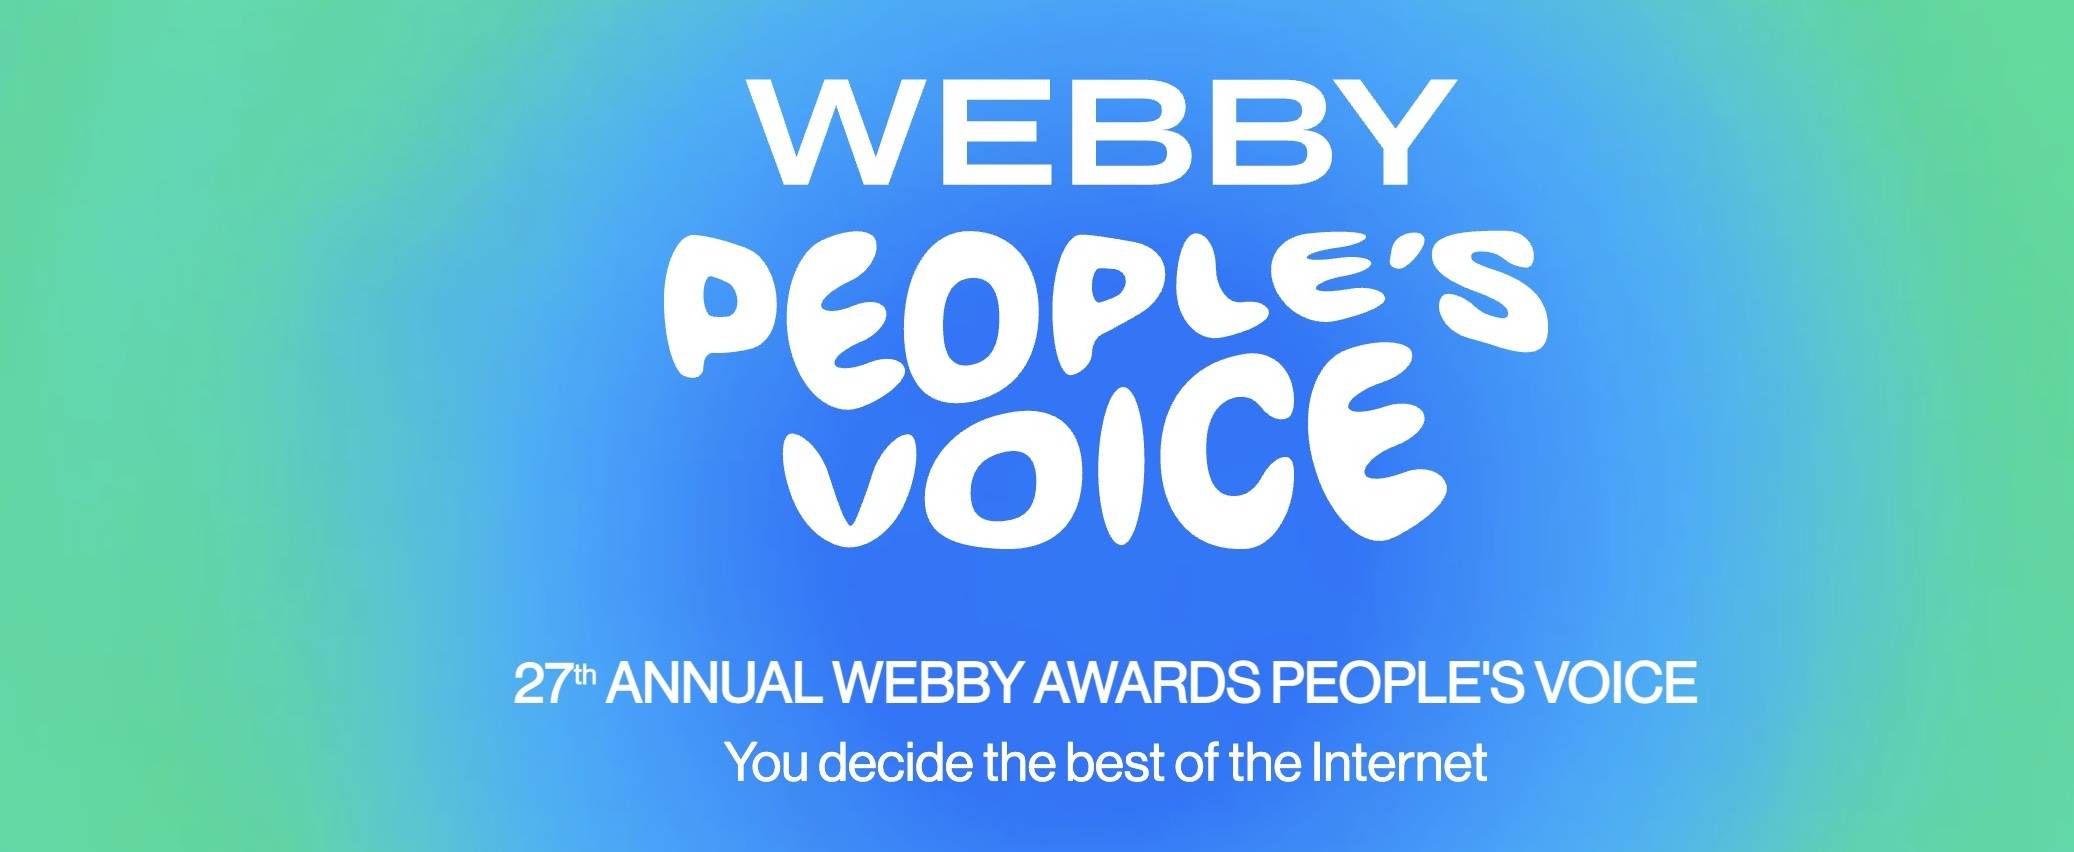 27th Annual WEBBY Awards People's Voice Poster Image